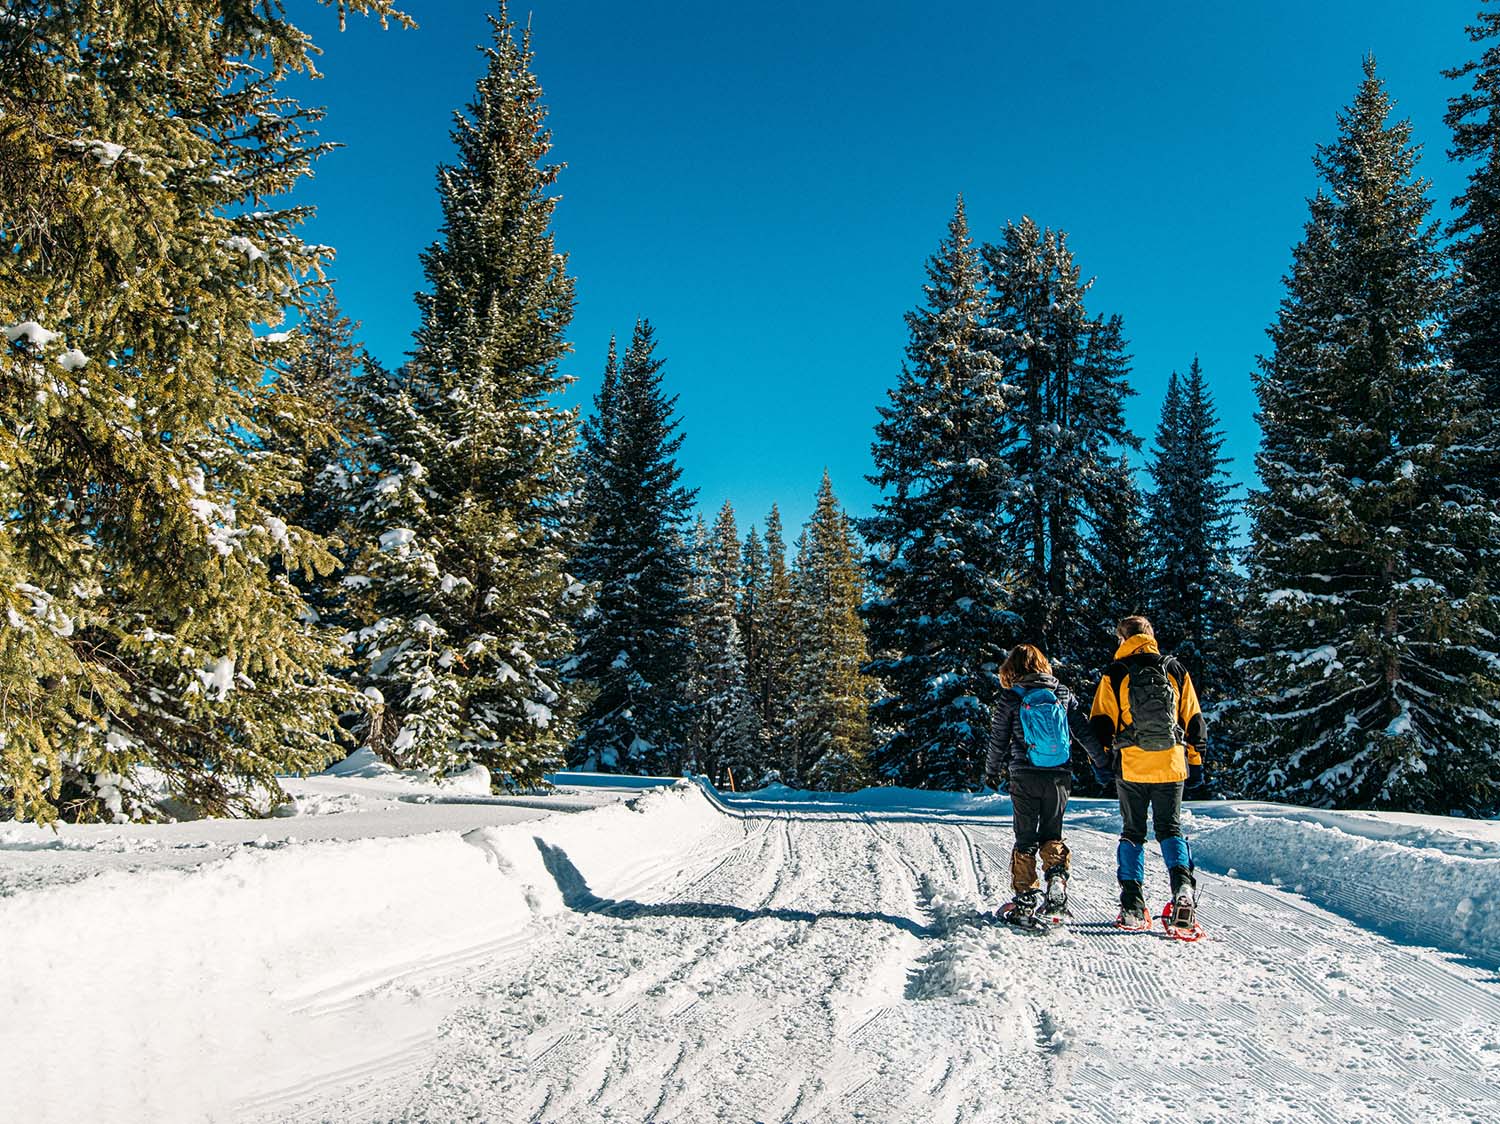 A man and woman taking a snowshoe walk in a winter landscape.